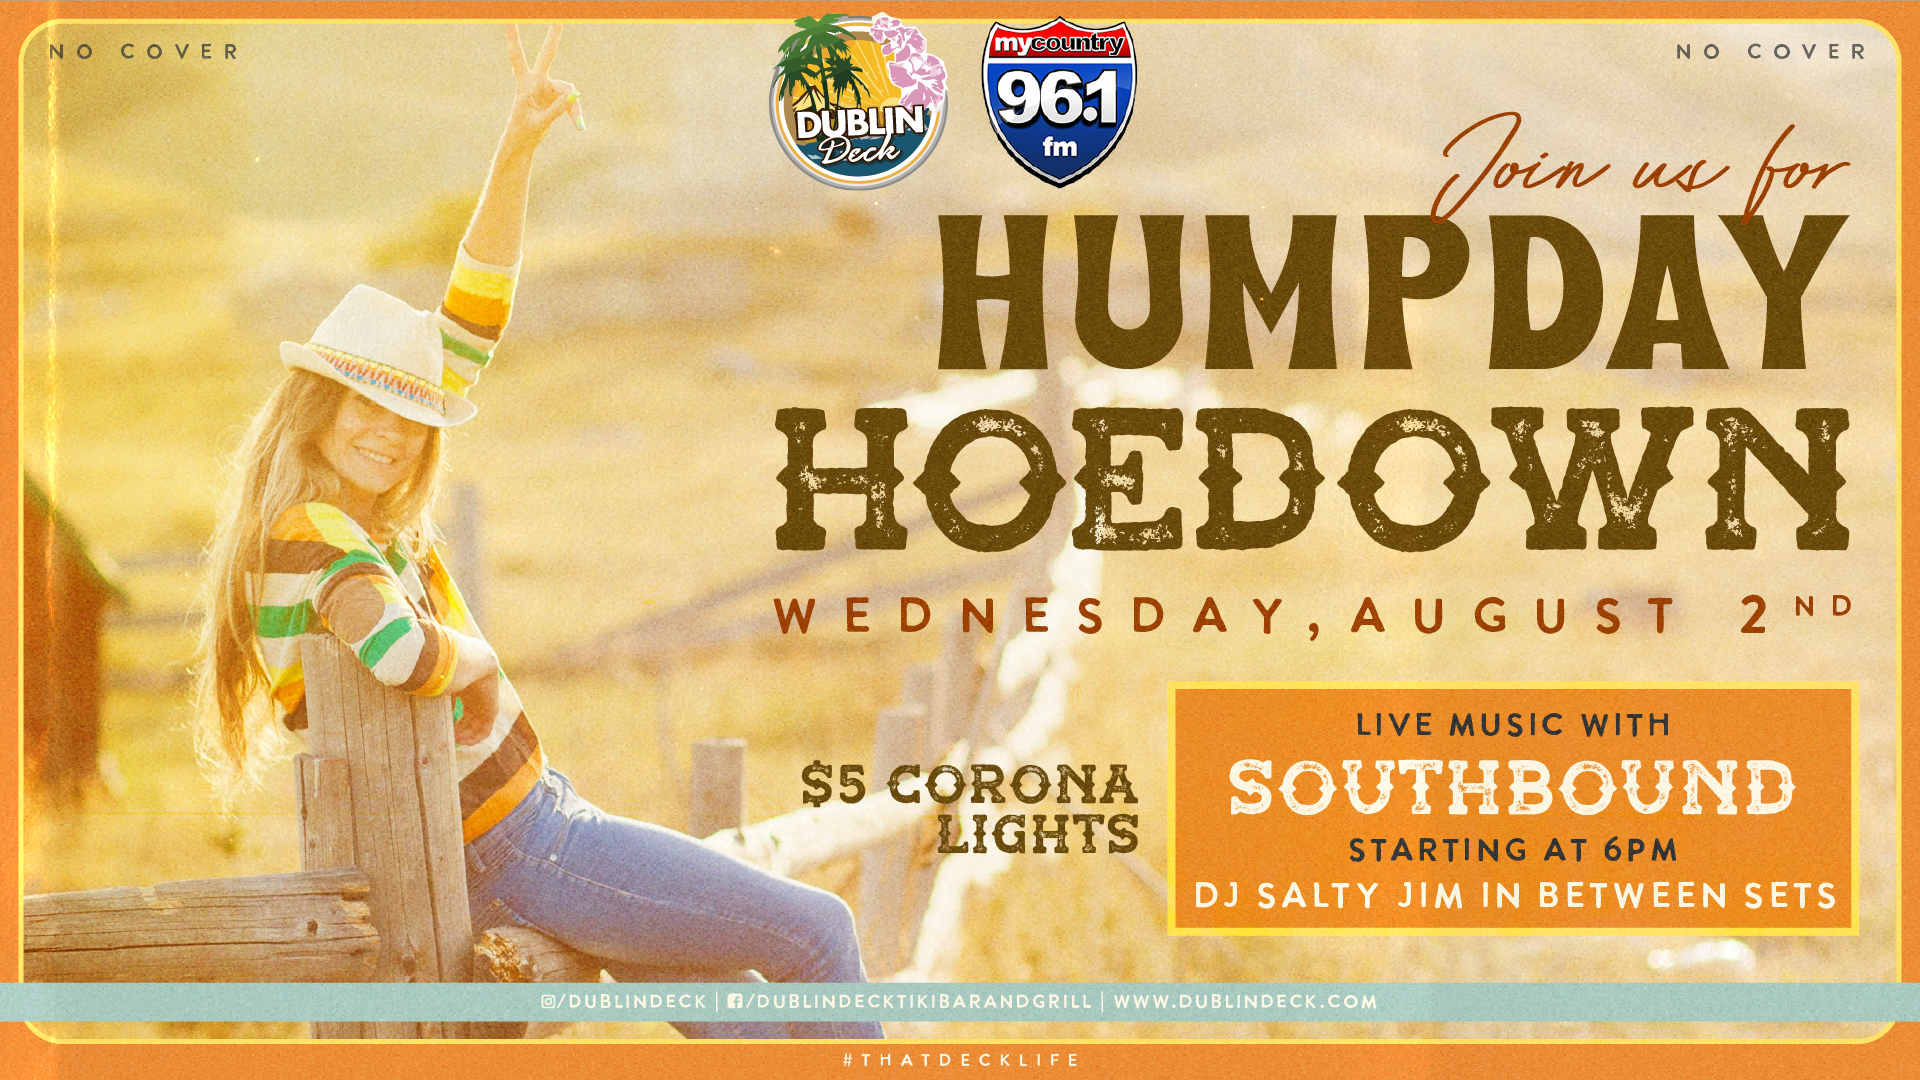 Get your cowboy boots on for Humpday Hoedown with Southbound! Music starts at 6PM